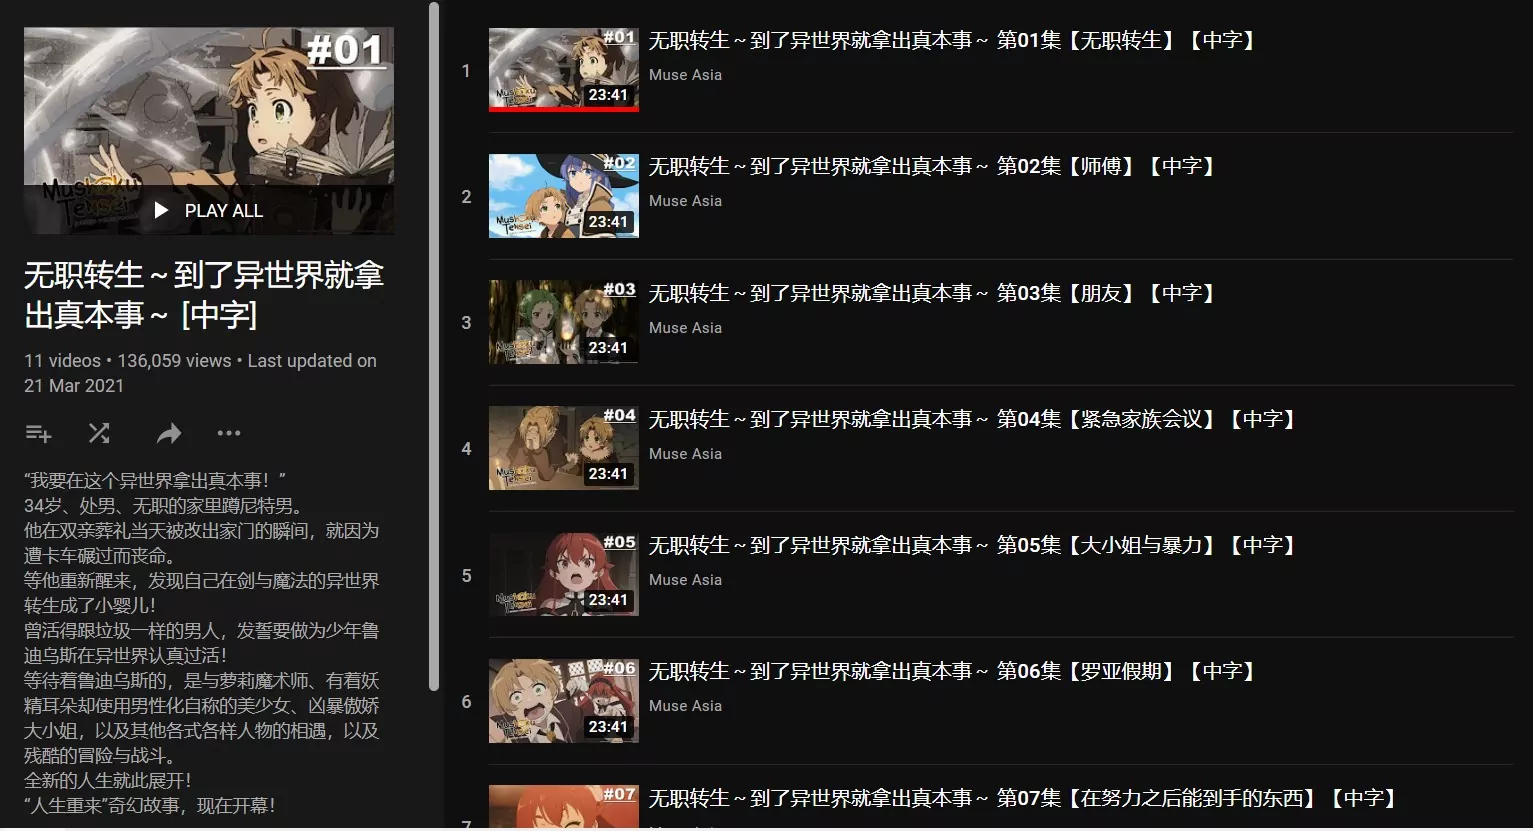 Chinese Subbed Anime on Muse Asia YouTube: